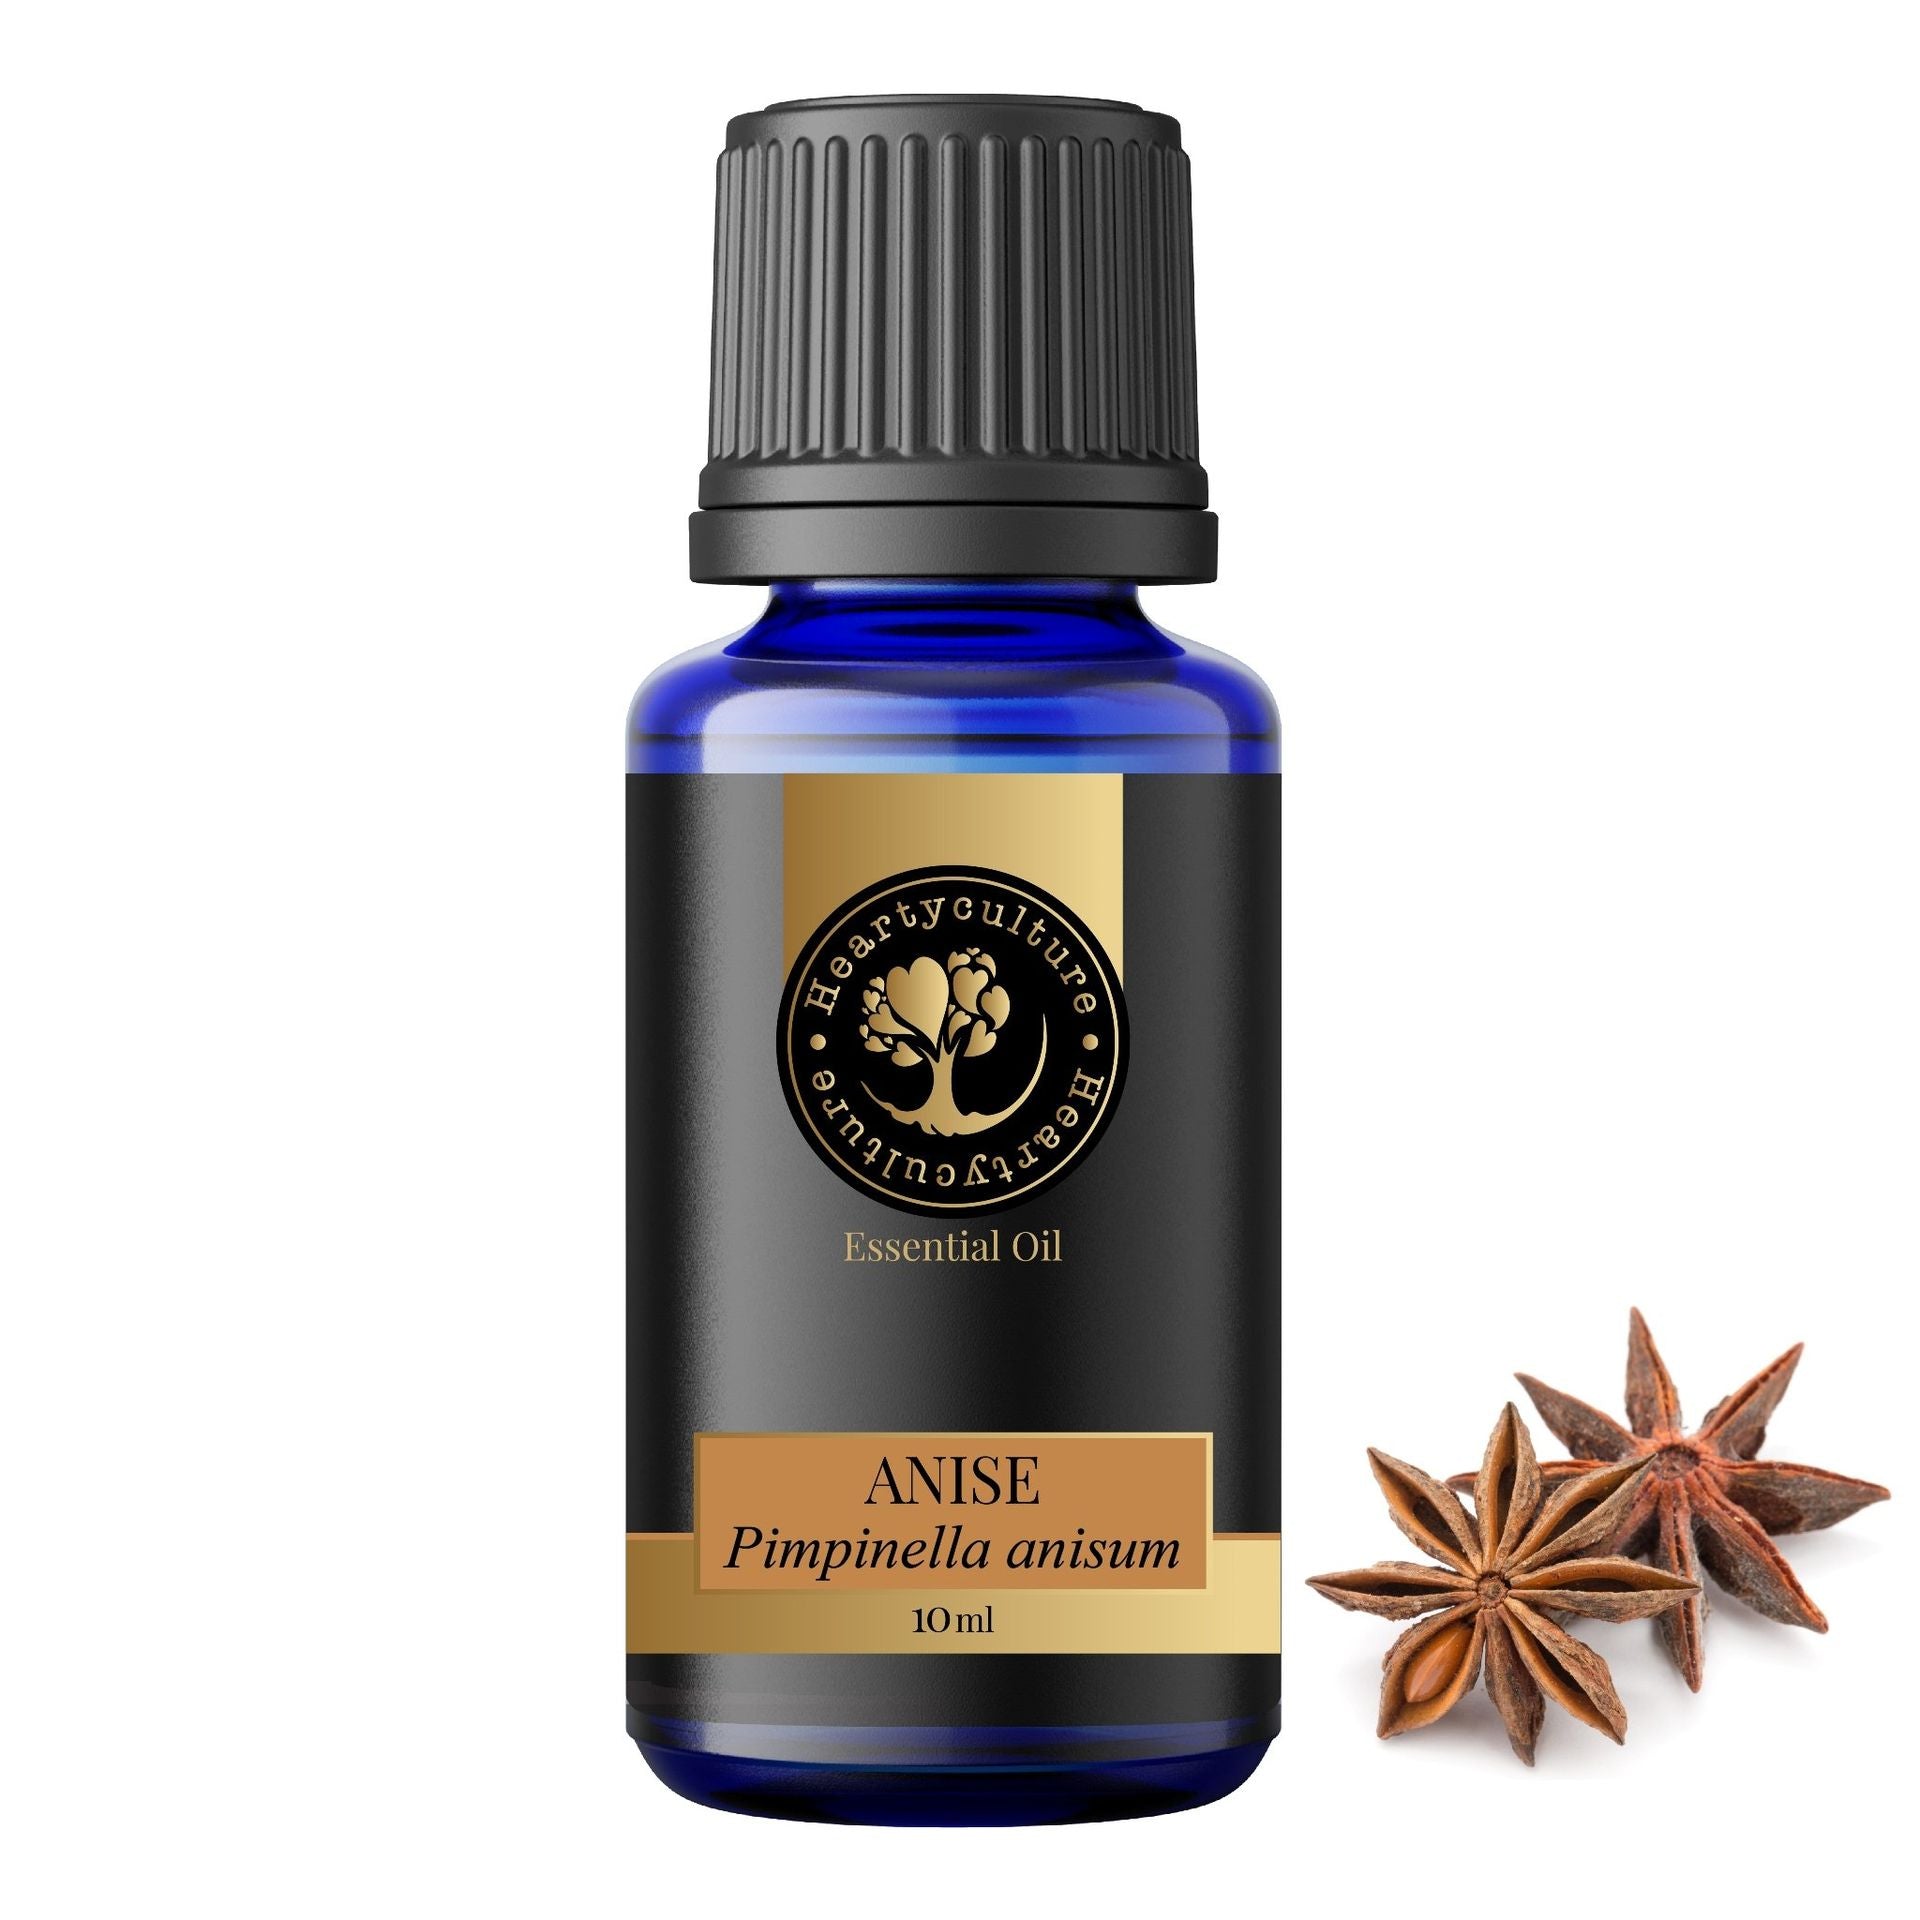 Heartyculture Anise Essential Oil - 10 ml - hfnl!fe